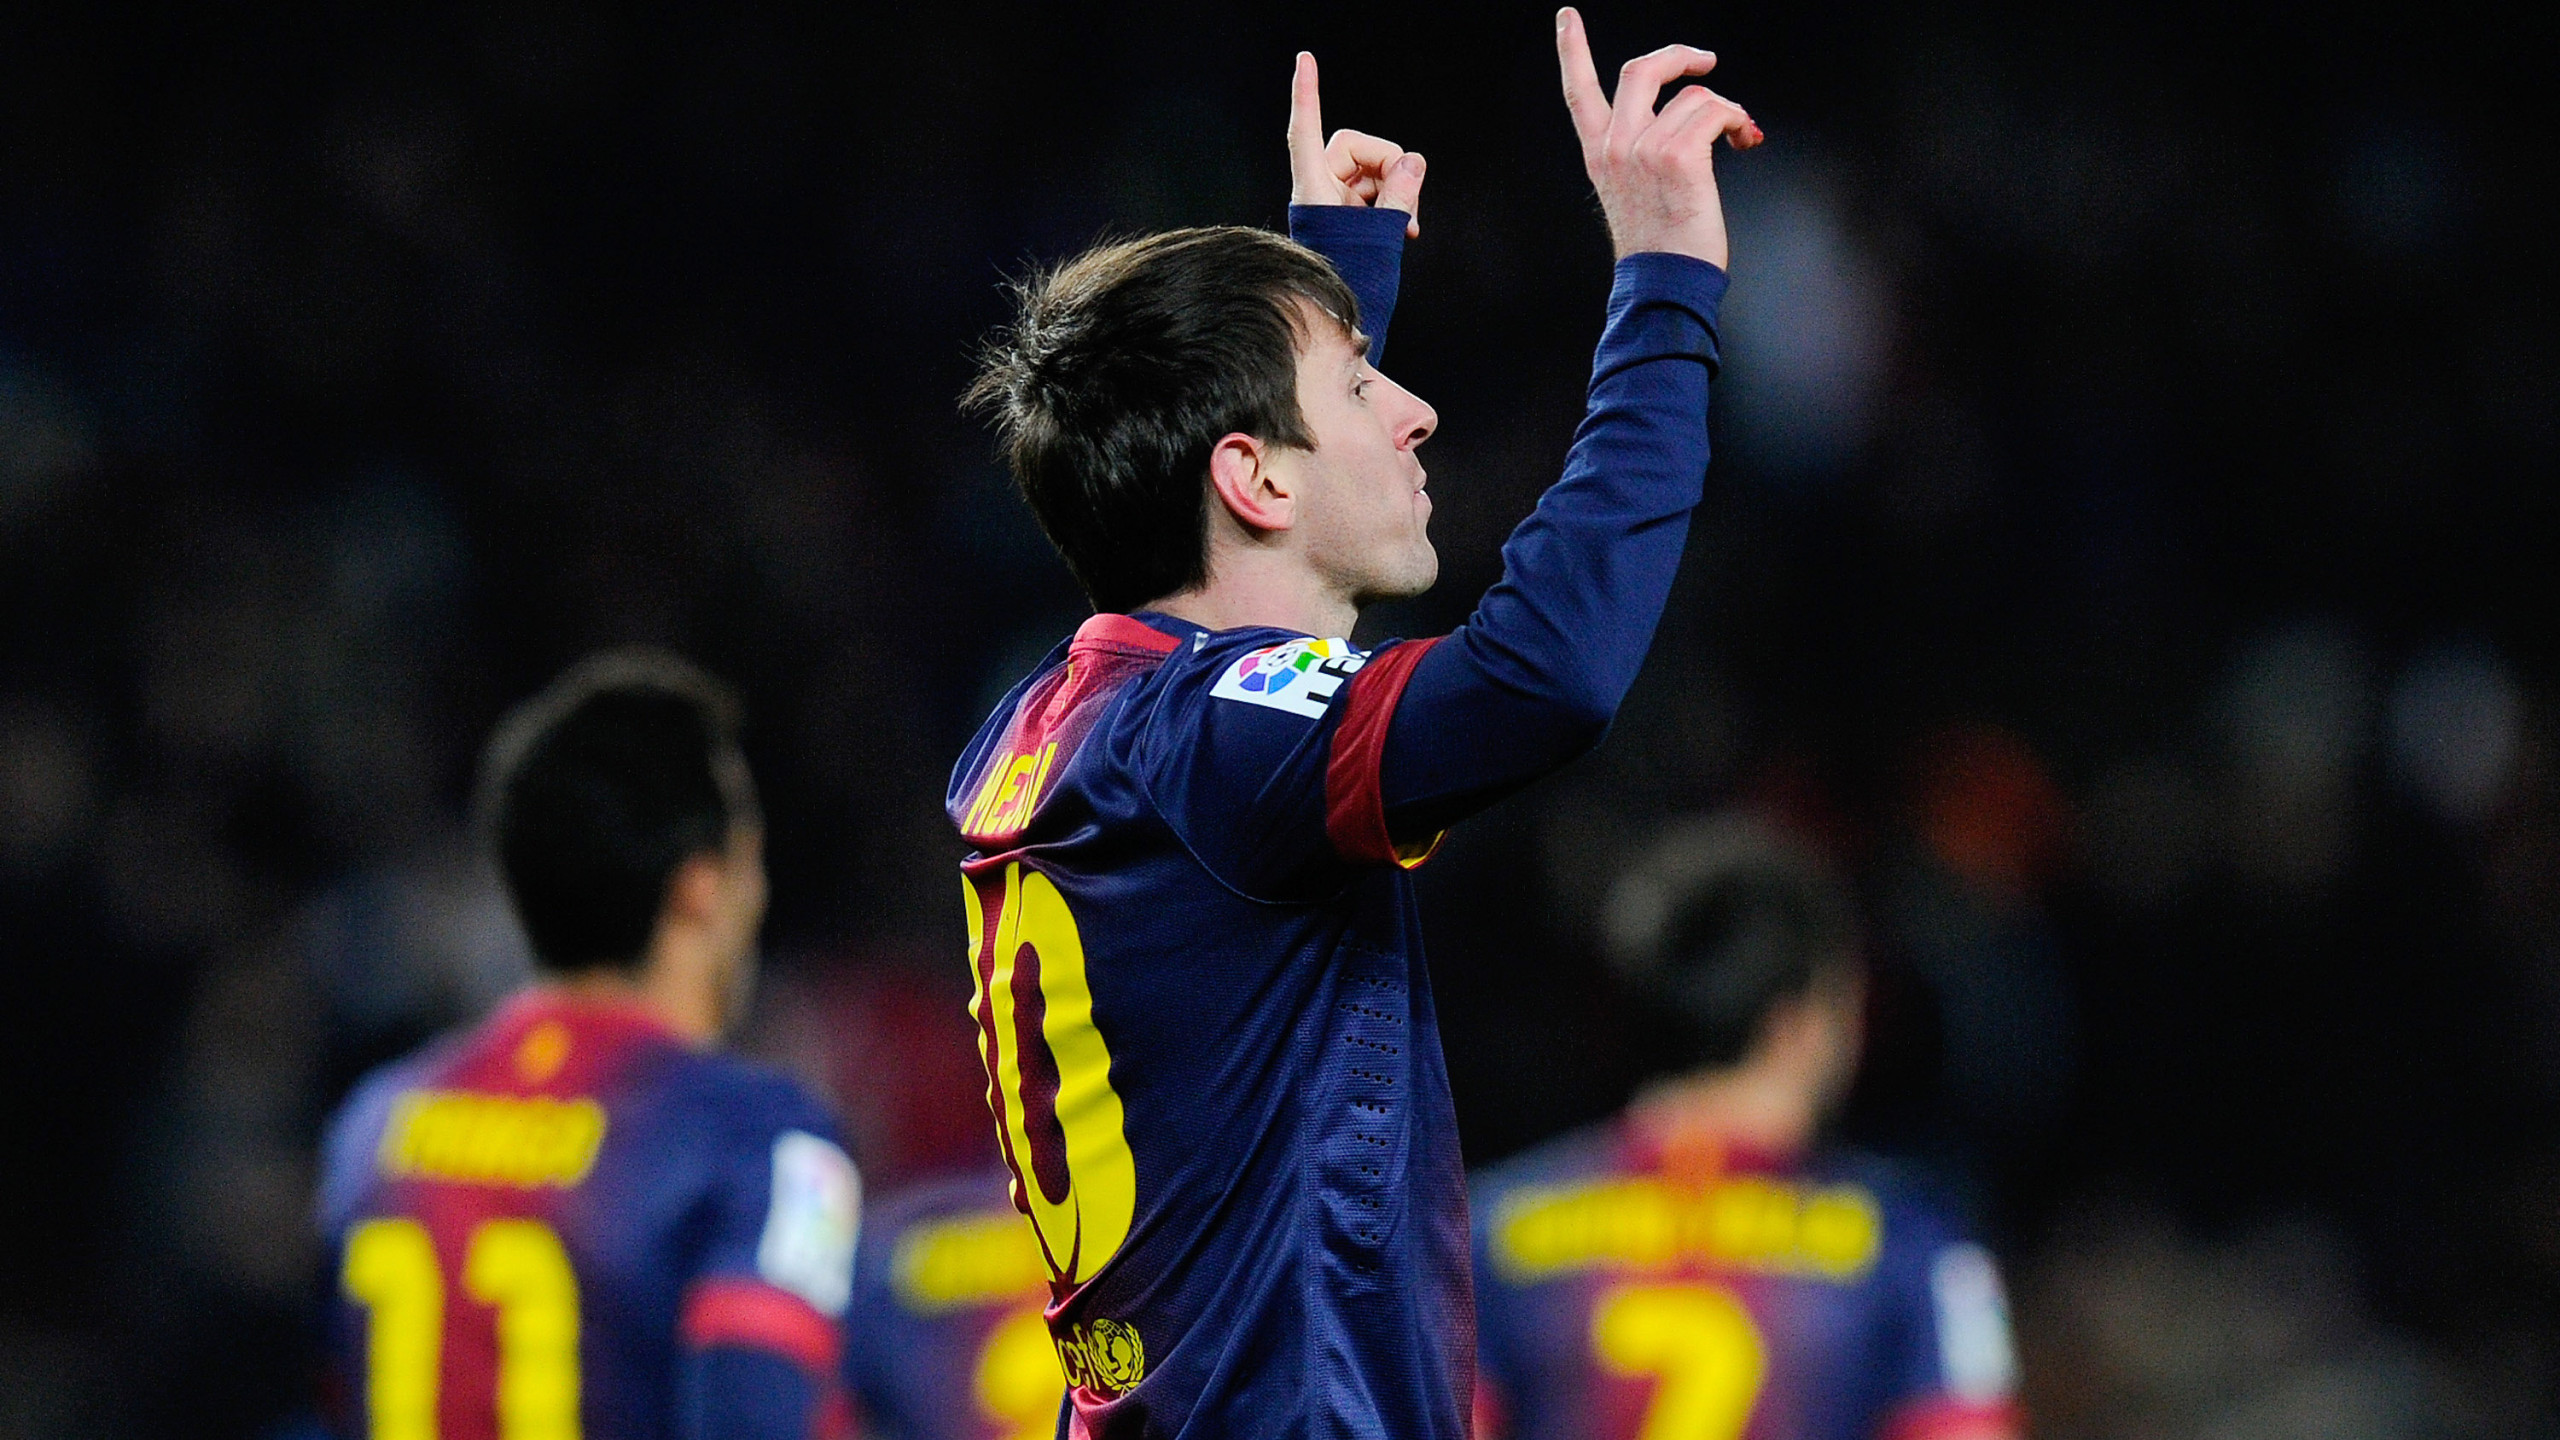 messi wallpaper free download,player,team sport,championship,soccer player,sports